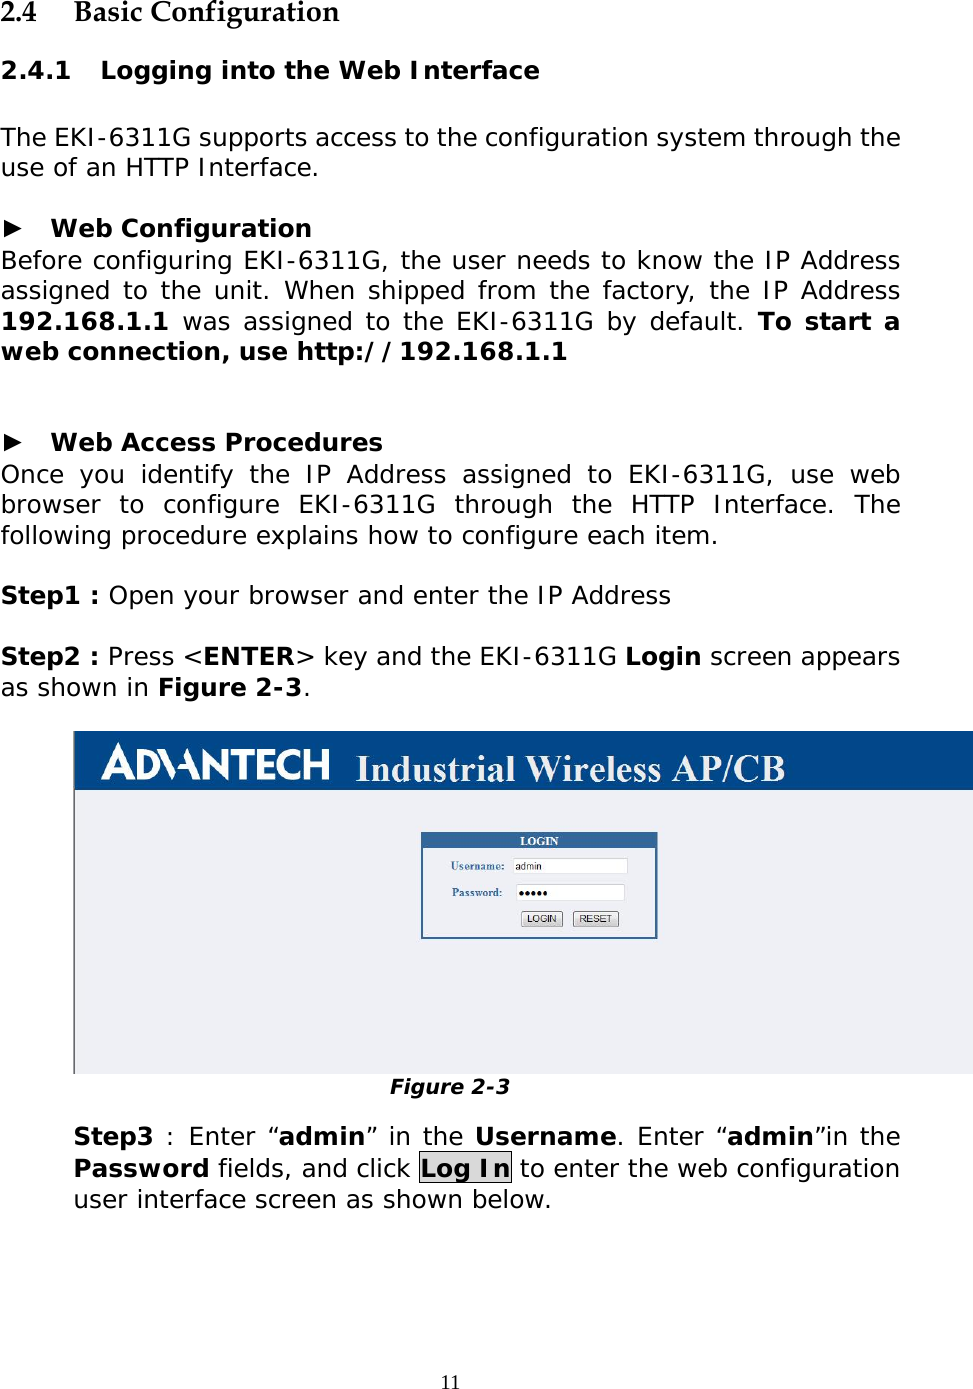                   2.4 Basic Configuration 2.4.1 Logging into the Web Interface  The EKI-6311G supports access to the configuration system through the use of an HTTP Interface.  ►  Web Configuration Before configuring EKI-6311G, the user needs to know the IP Address assigned to the unit. When shipped from the factory, the IP Address 192.168.1.1 was assigned to the EKI-6311G by default. To start a web connection, use http://192.168.1.1   ►  Web Access Procedures Once you identify the IP Address assigned to EKI-6311G, use web browser to configure EKI-6311G through the HTTP Interface. The following procedure explains how to configure each item.  Step1 : Open your browser and enter the IP Address  Step2 : Press &lt;ENTER&gt; key and the EKI-6311G Login screen appears as shown in Figure 2-3.   Figure 2-3  Step3 : Enter “admin” in the Username. Enter “admin”in the Password fields, and click Log In to enter the web configuration user interface screen as shown below.   11 